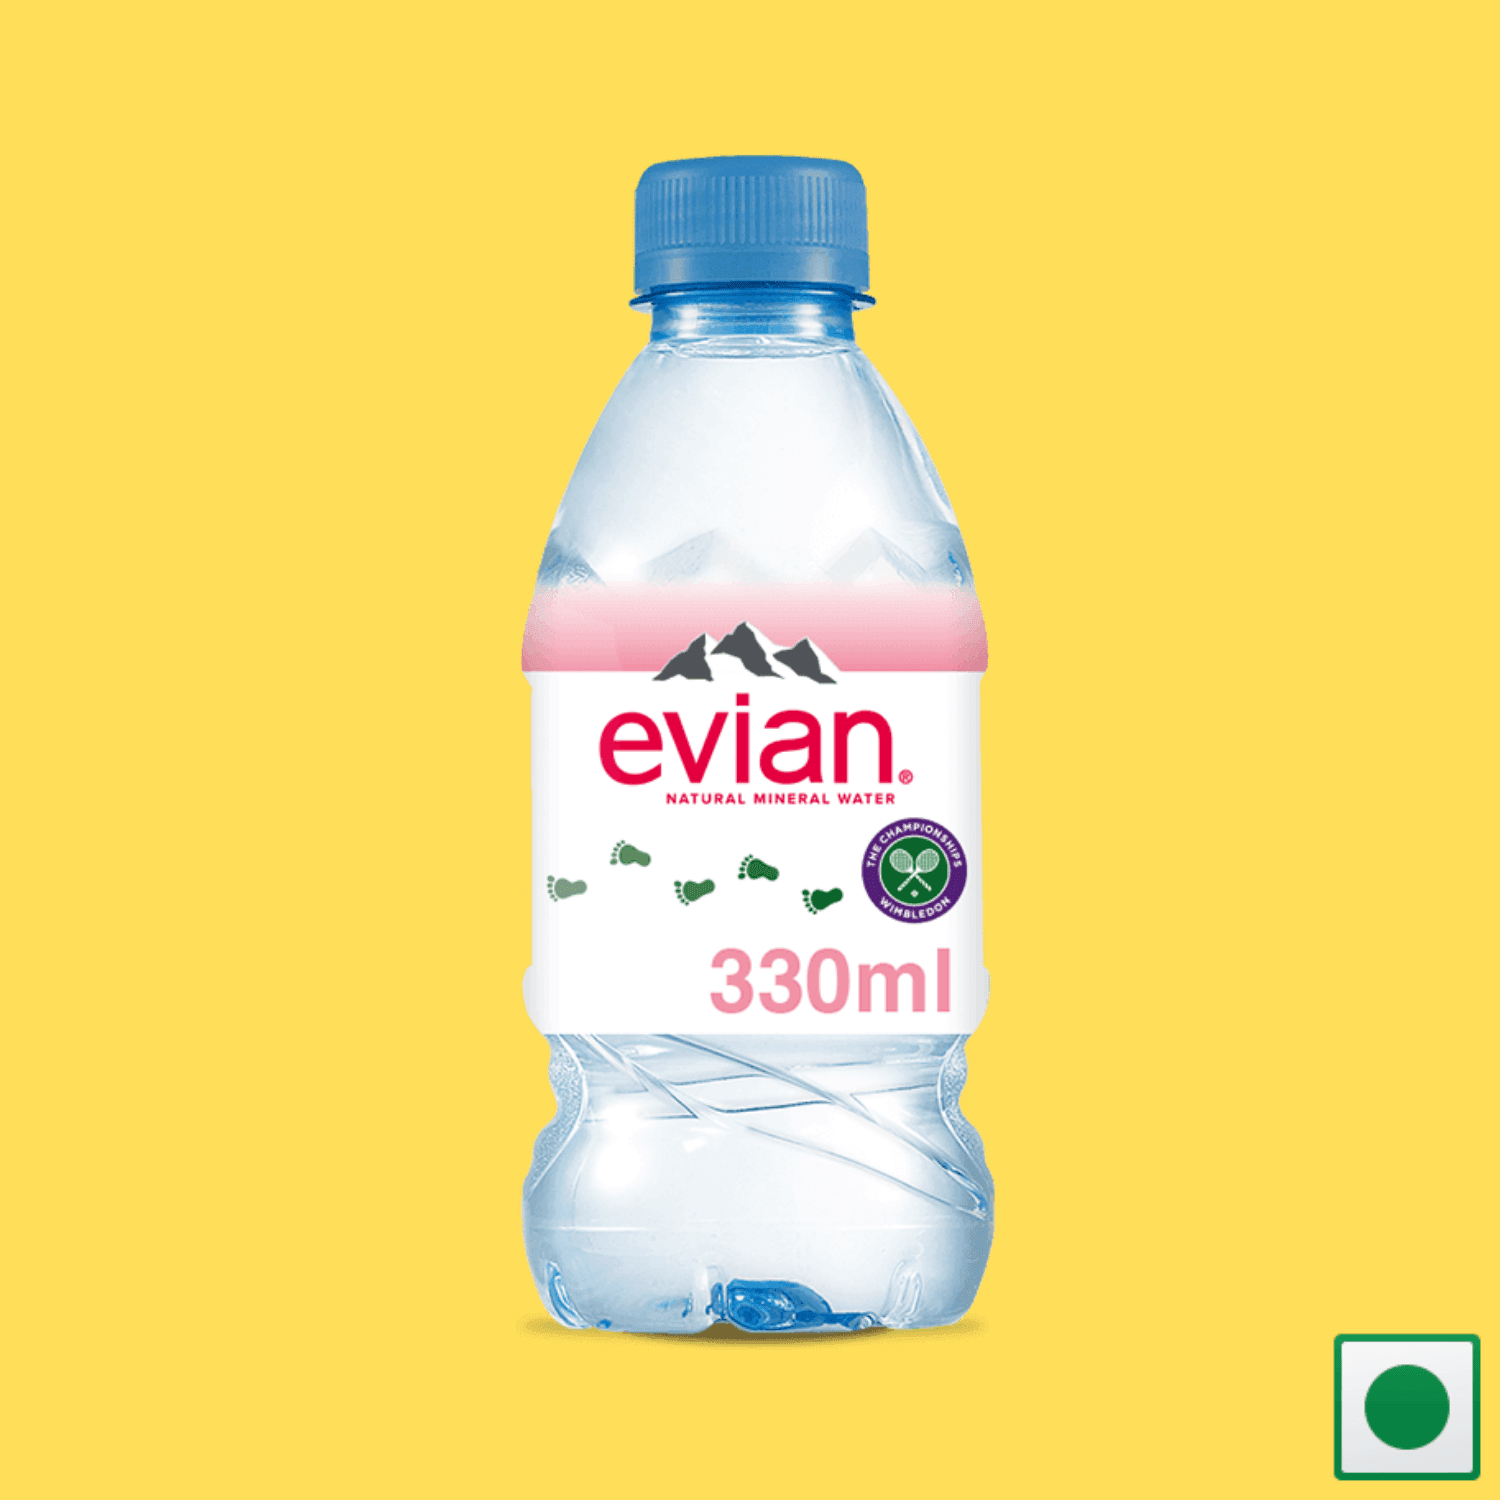 Evian Natural Mineral Water, 330ml (Imported) - Super 7 Mart